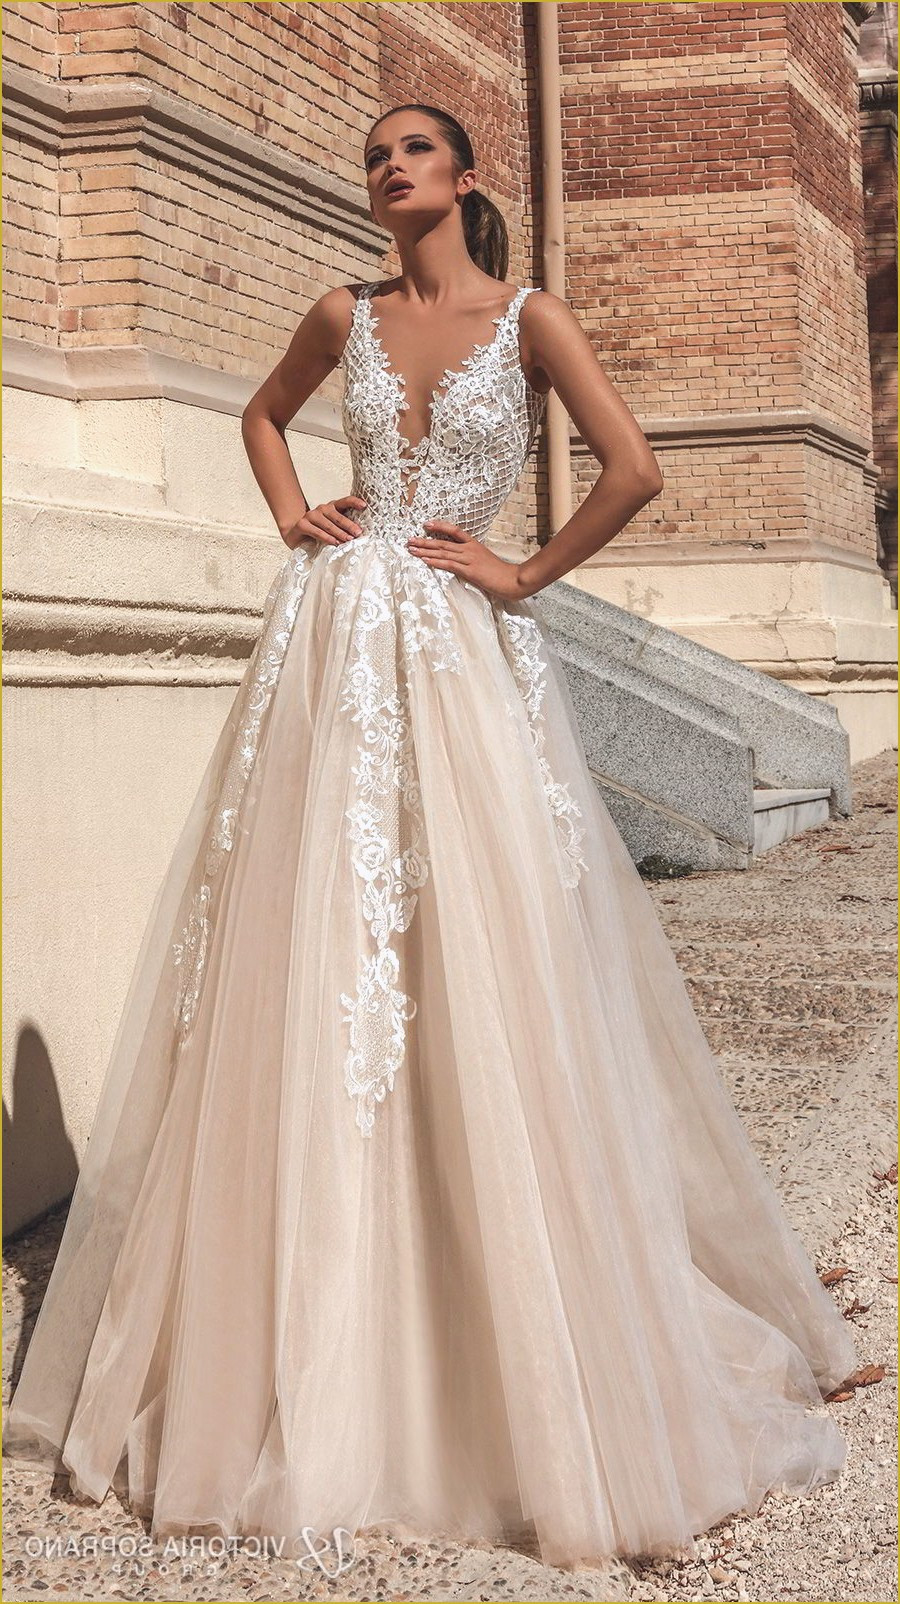 Champagne Wedding Gowns
 Best 21 Champagne Wedding Dresses in 2019 Royal Wedding